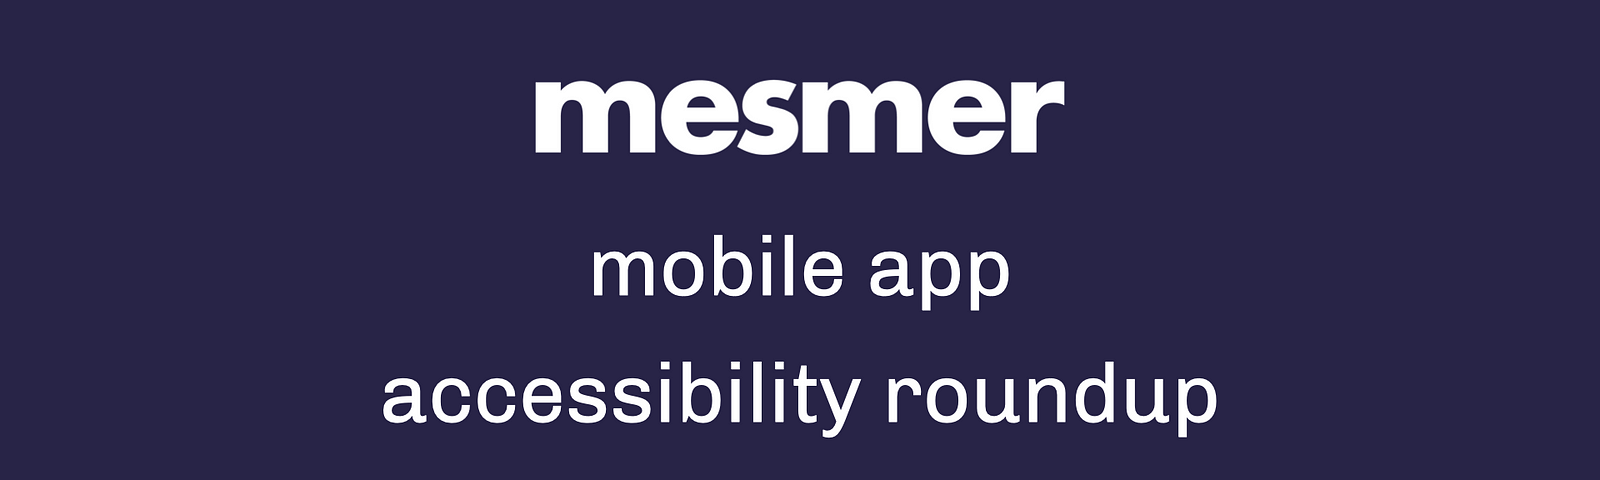 Mesmer mobile app accessibility roundup — June 15, 2020